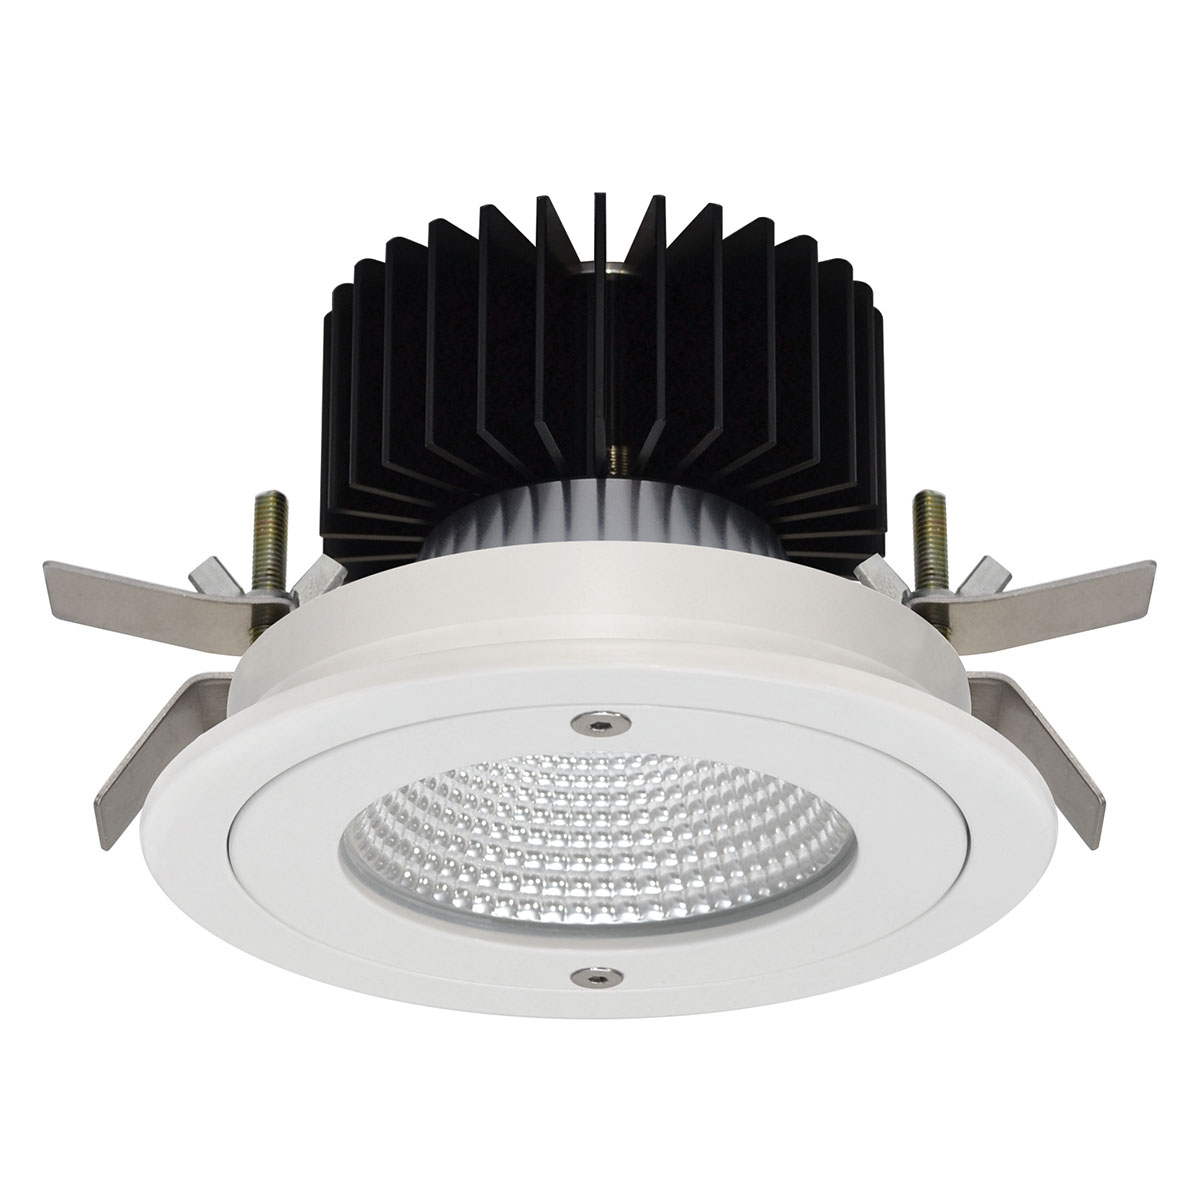 Kopa 10W Anti Tamper Fixed Round Recessed Downlight IP65 Rated 38° Degree Reflector White